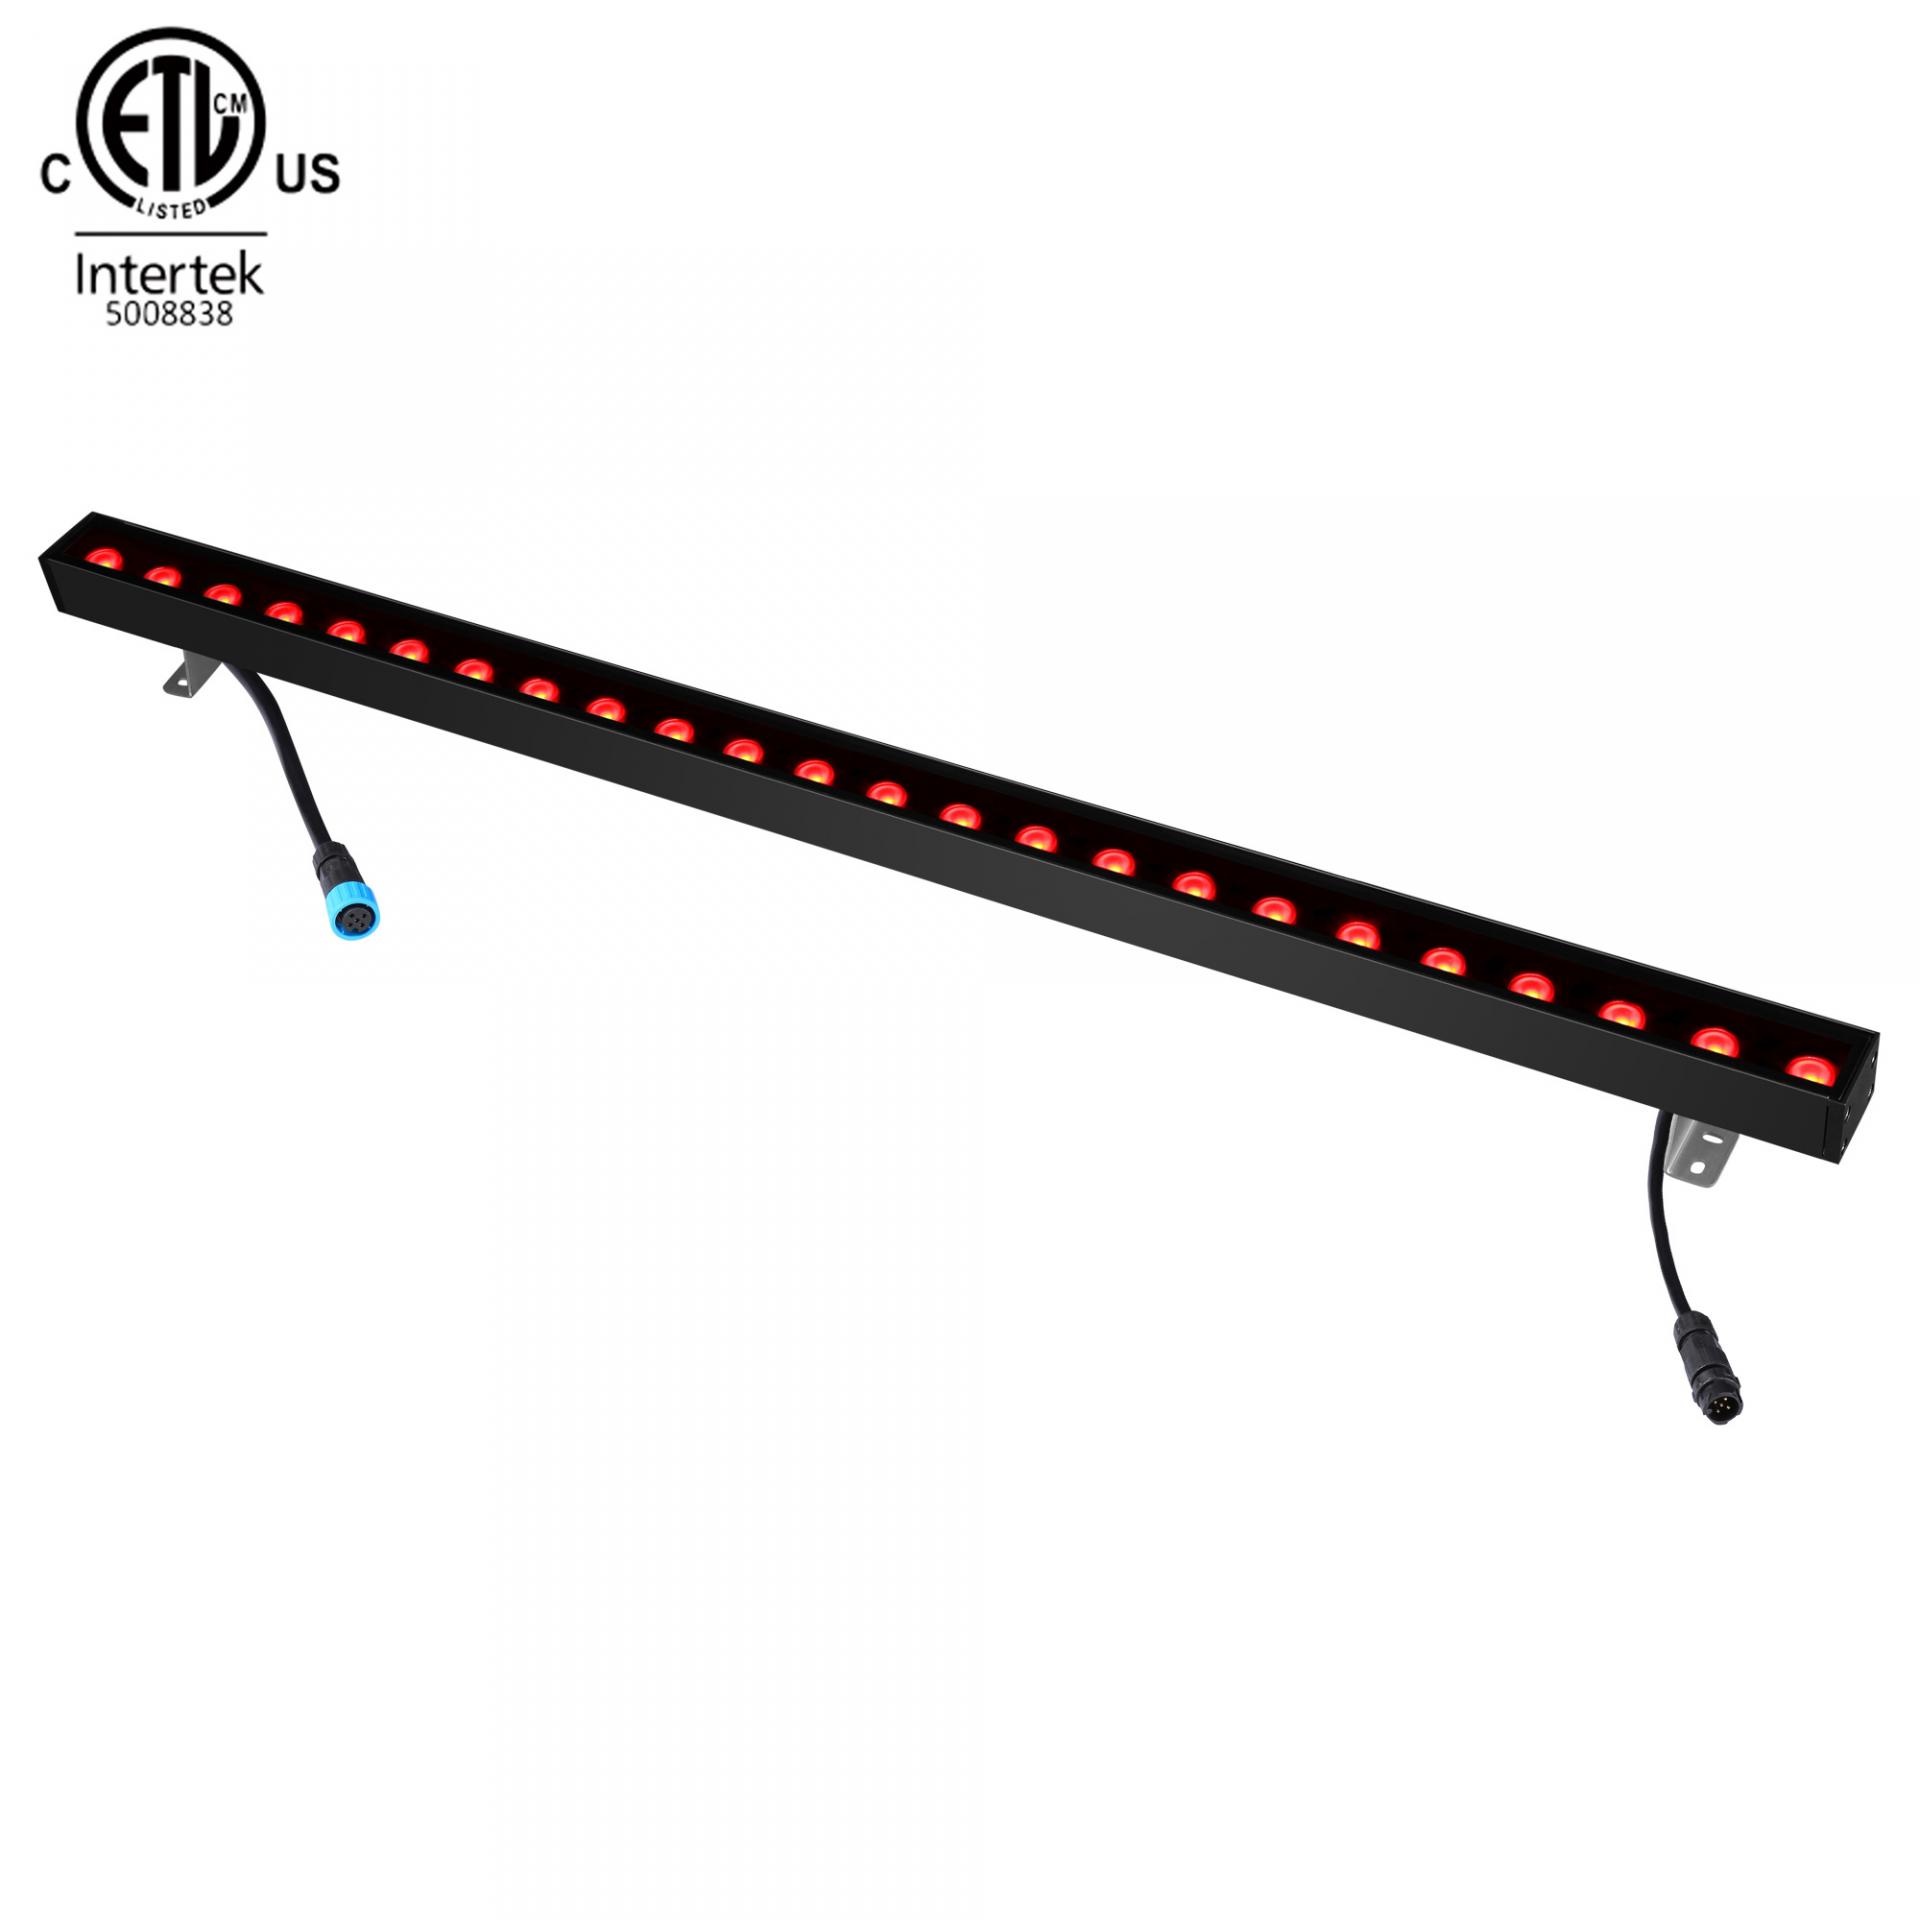 UL ETL Listed 40 inches 50cm lenght 36W RGB RGBW LED Wall Washer